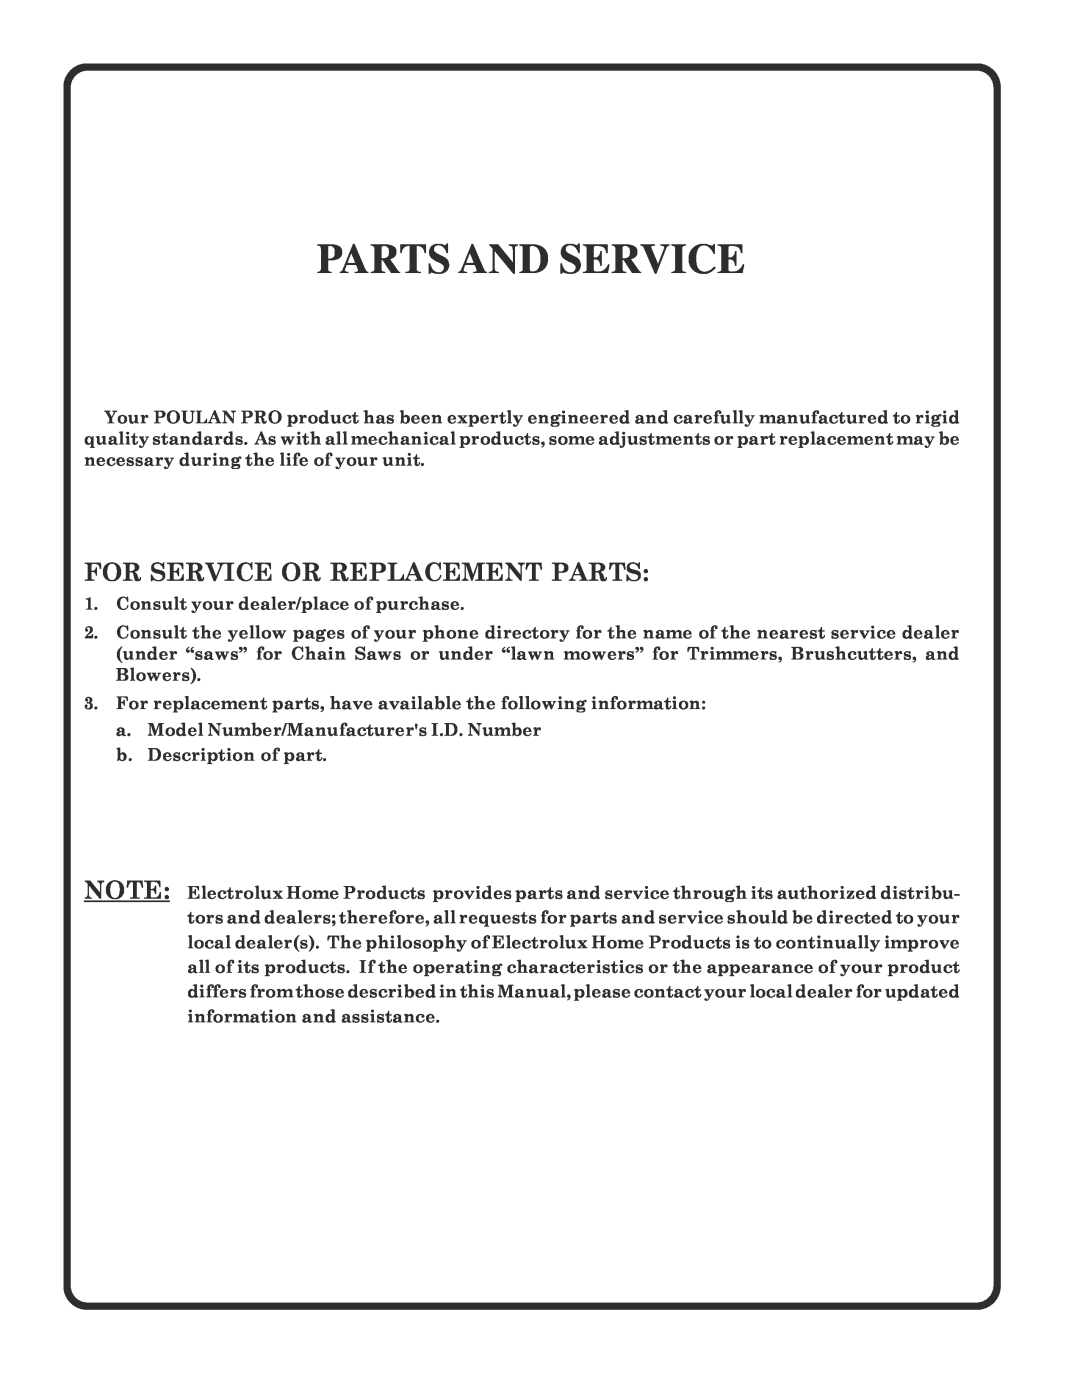 Poulan PR1742STF owner manual Parts And Service, For Service Or Replacement Parts 